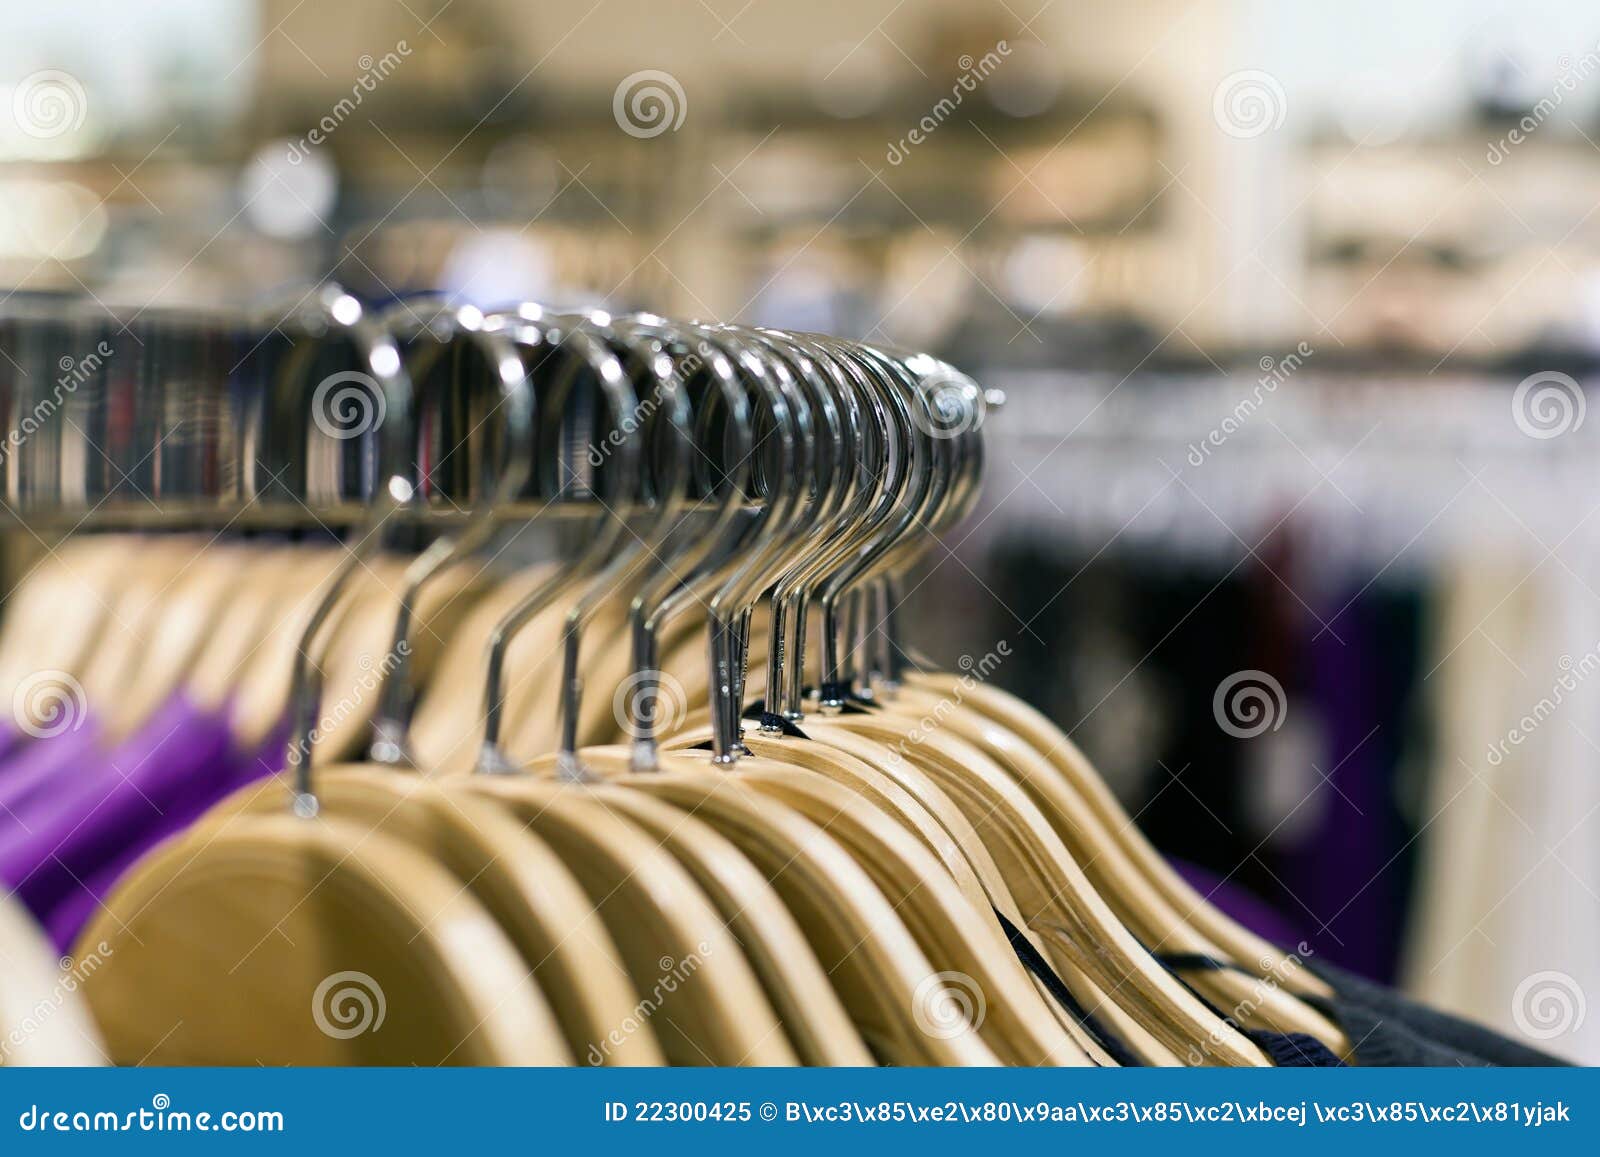 Hangers and shopping stock image. Image of clothing, hangers - 22300425